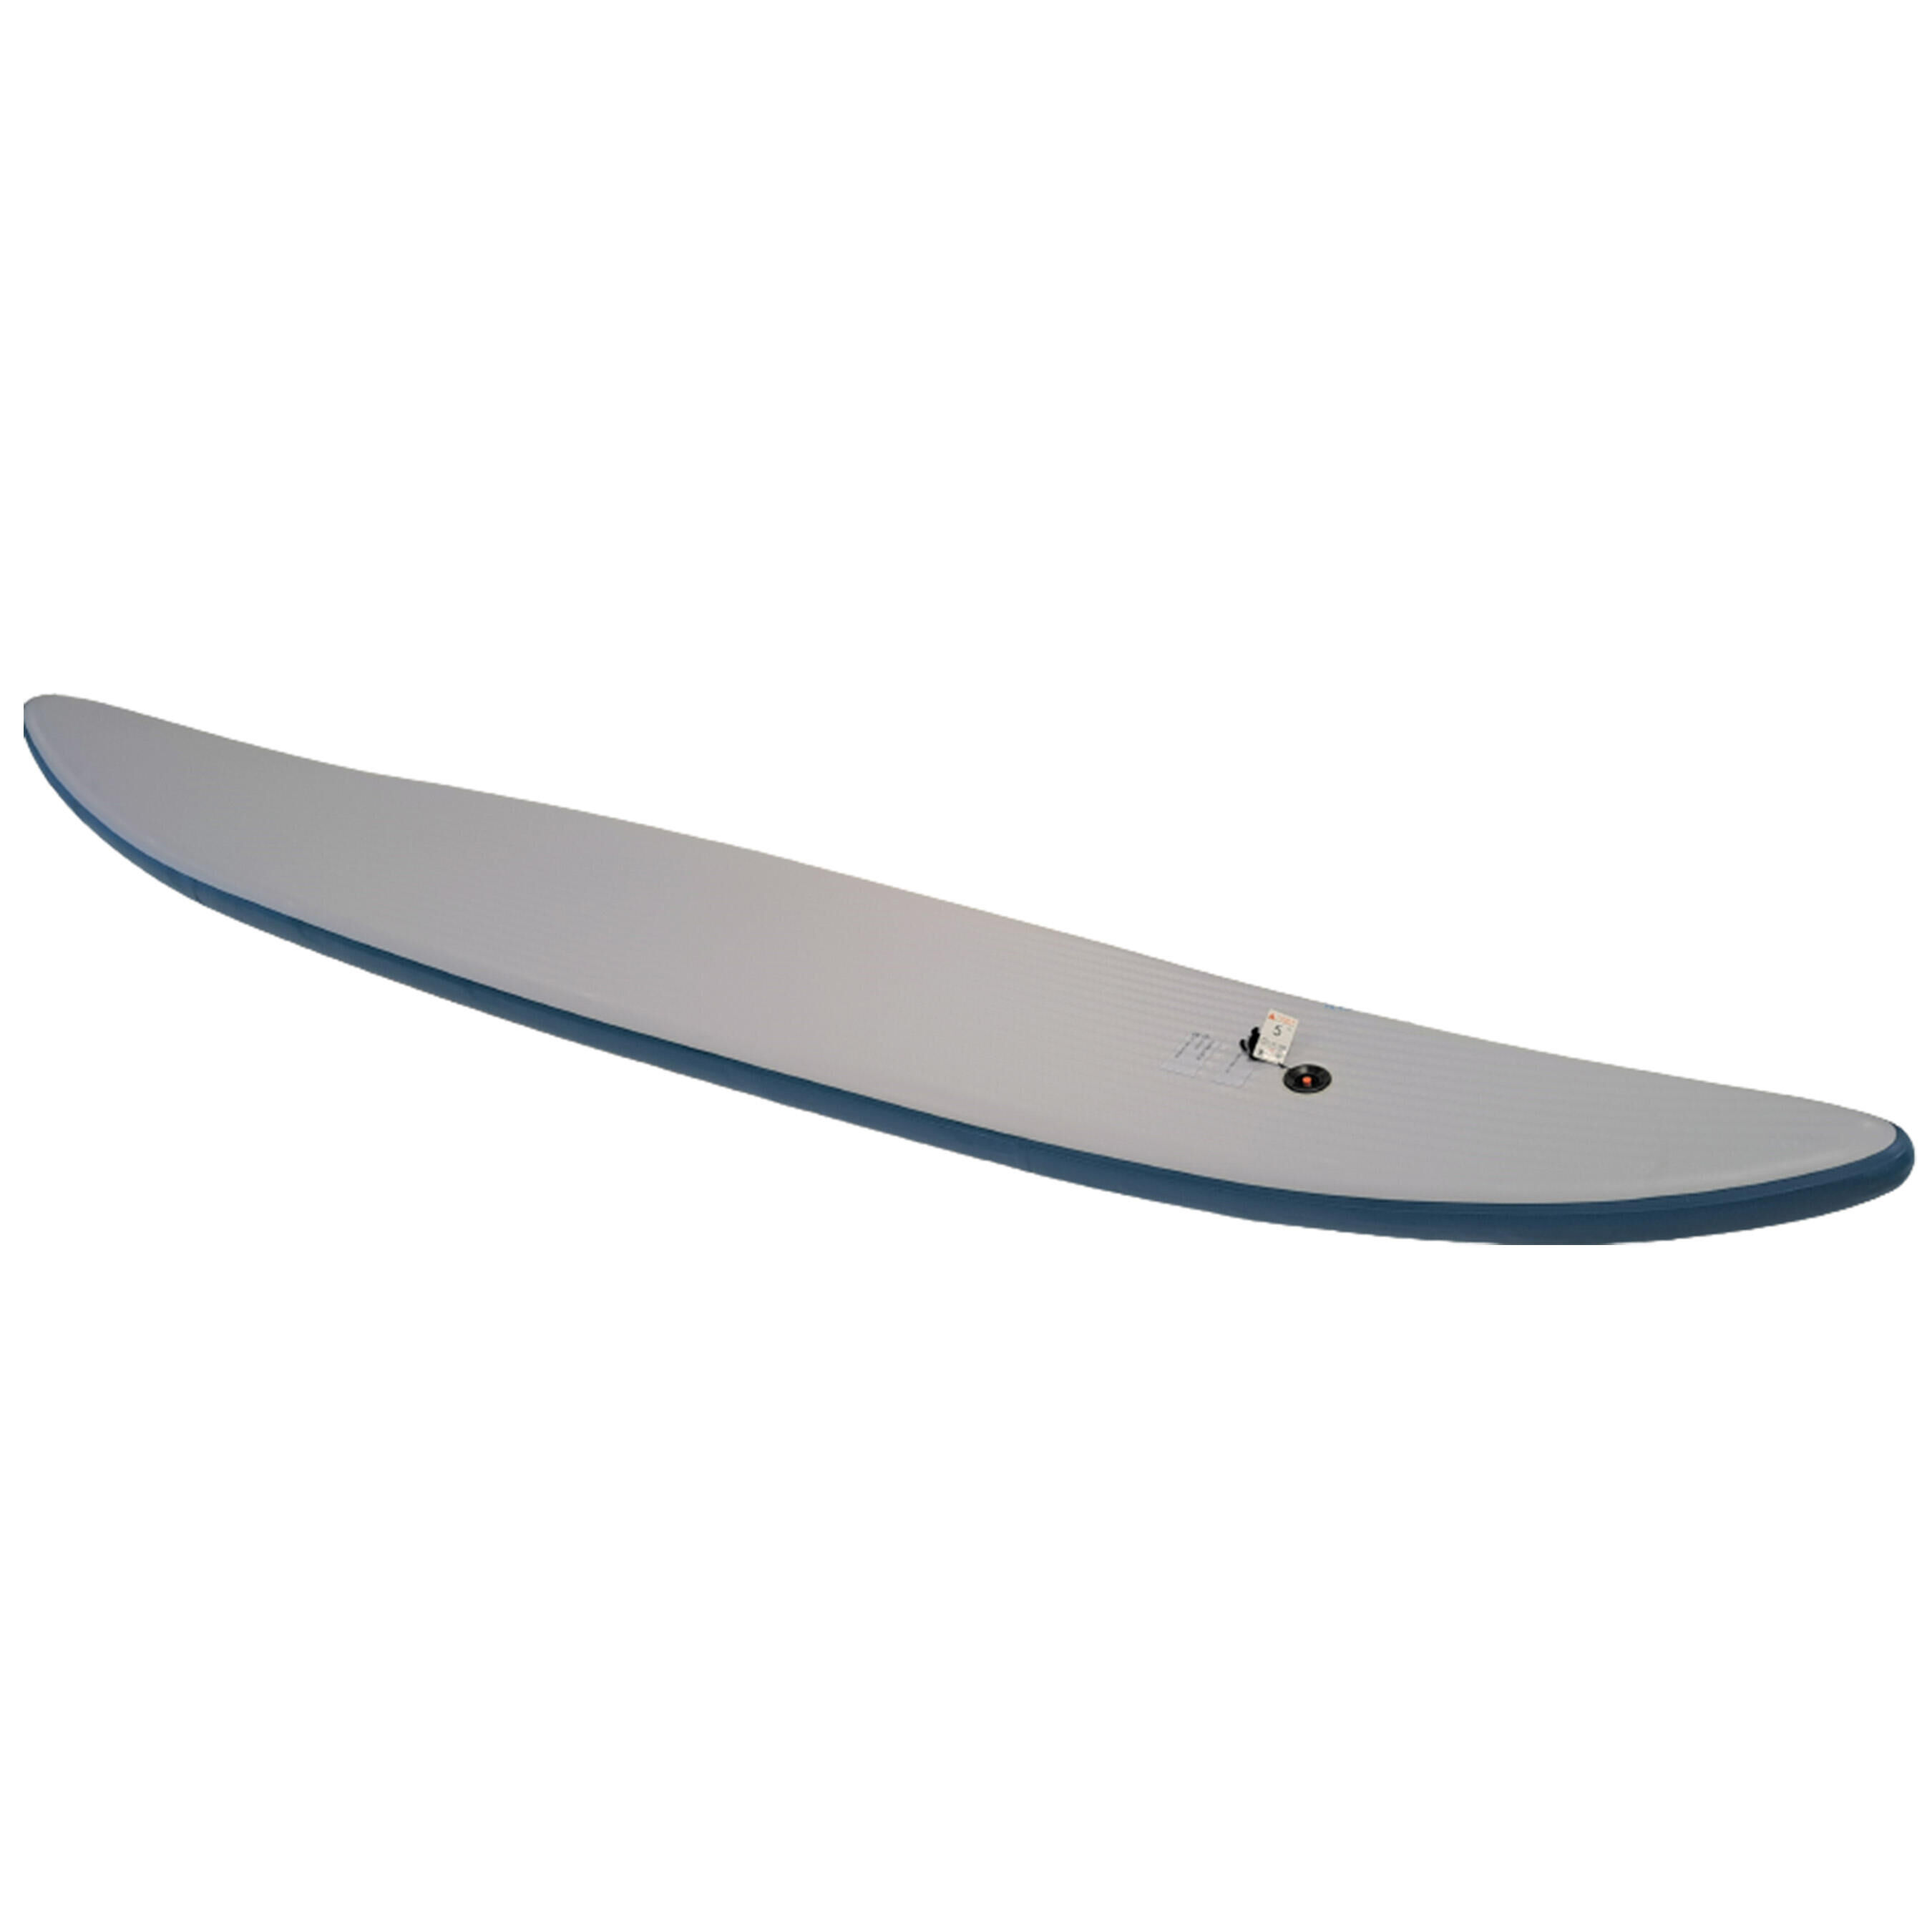 ITIWIT REINFORCED FLOOR BLADDER FOR ITIWIT 100 3-SEATER TEXTILE KAYAKS